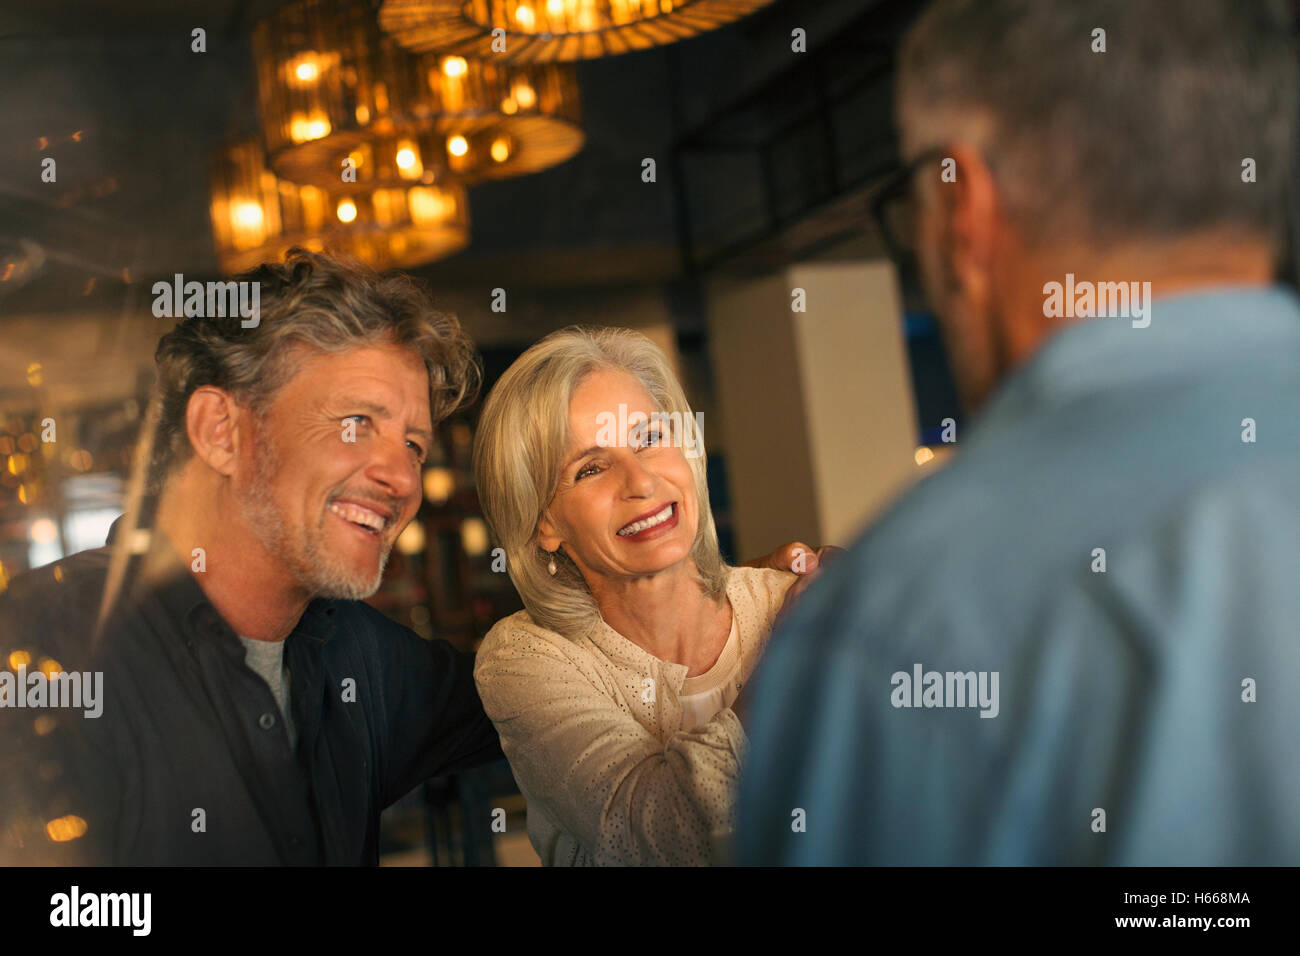 Smiling friends talking in restaurant Stock Photo